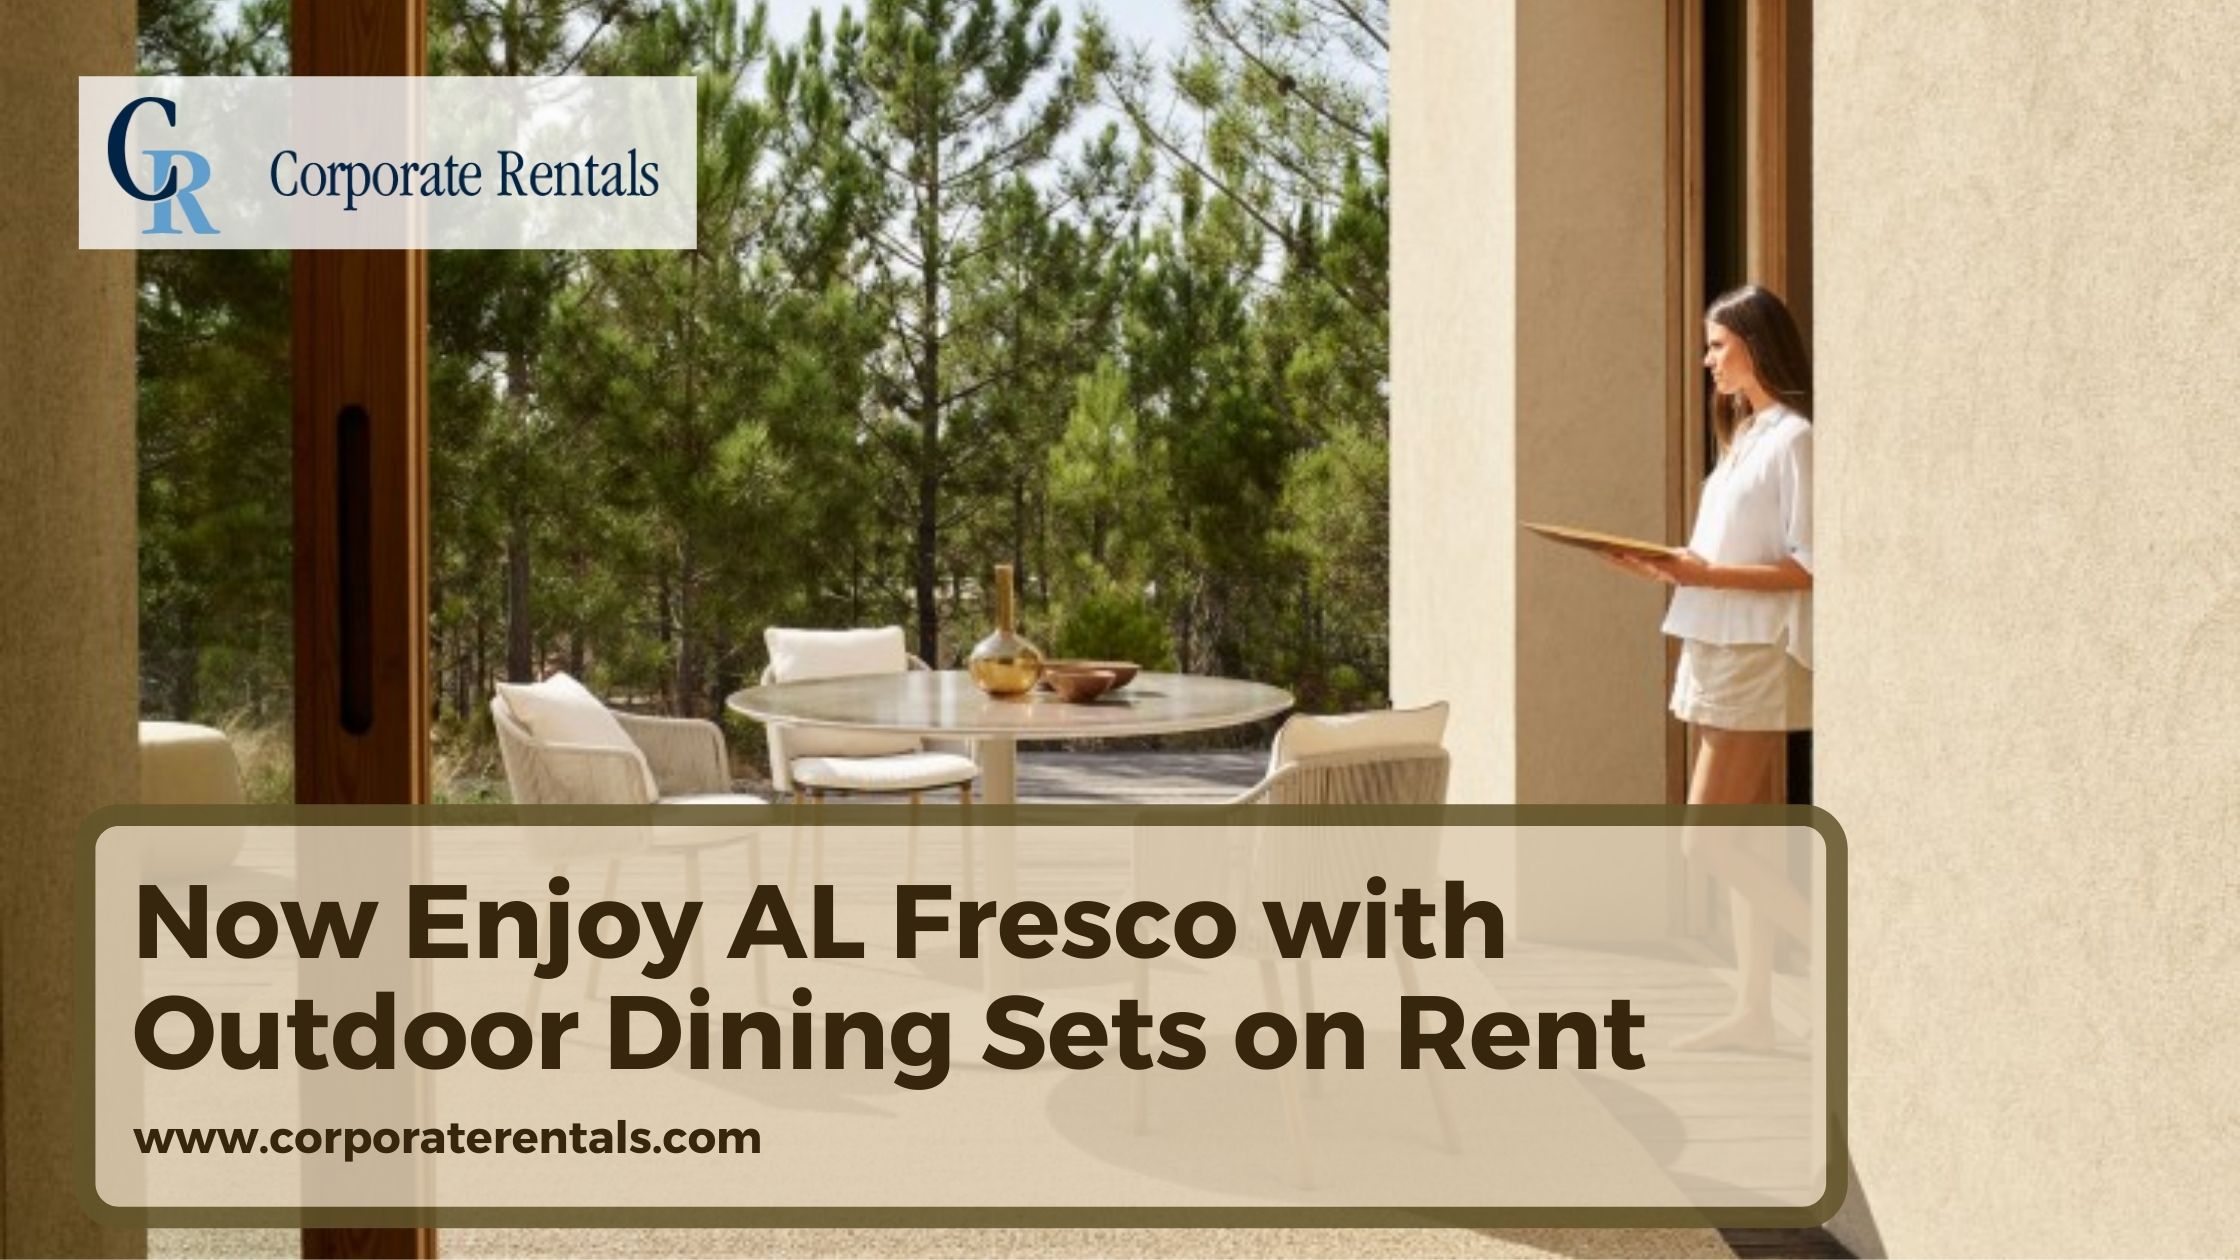 Now Enjoy AL Fresco with Outdoor Dining Sets on Rent